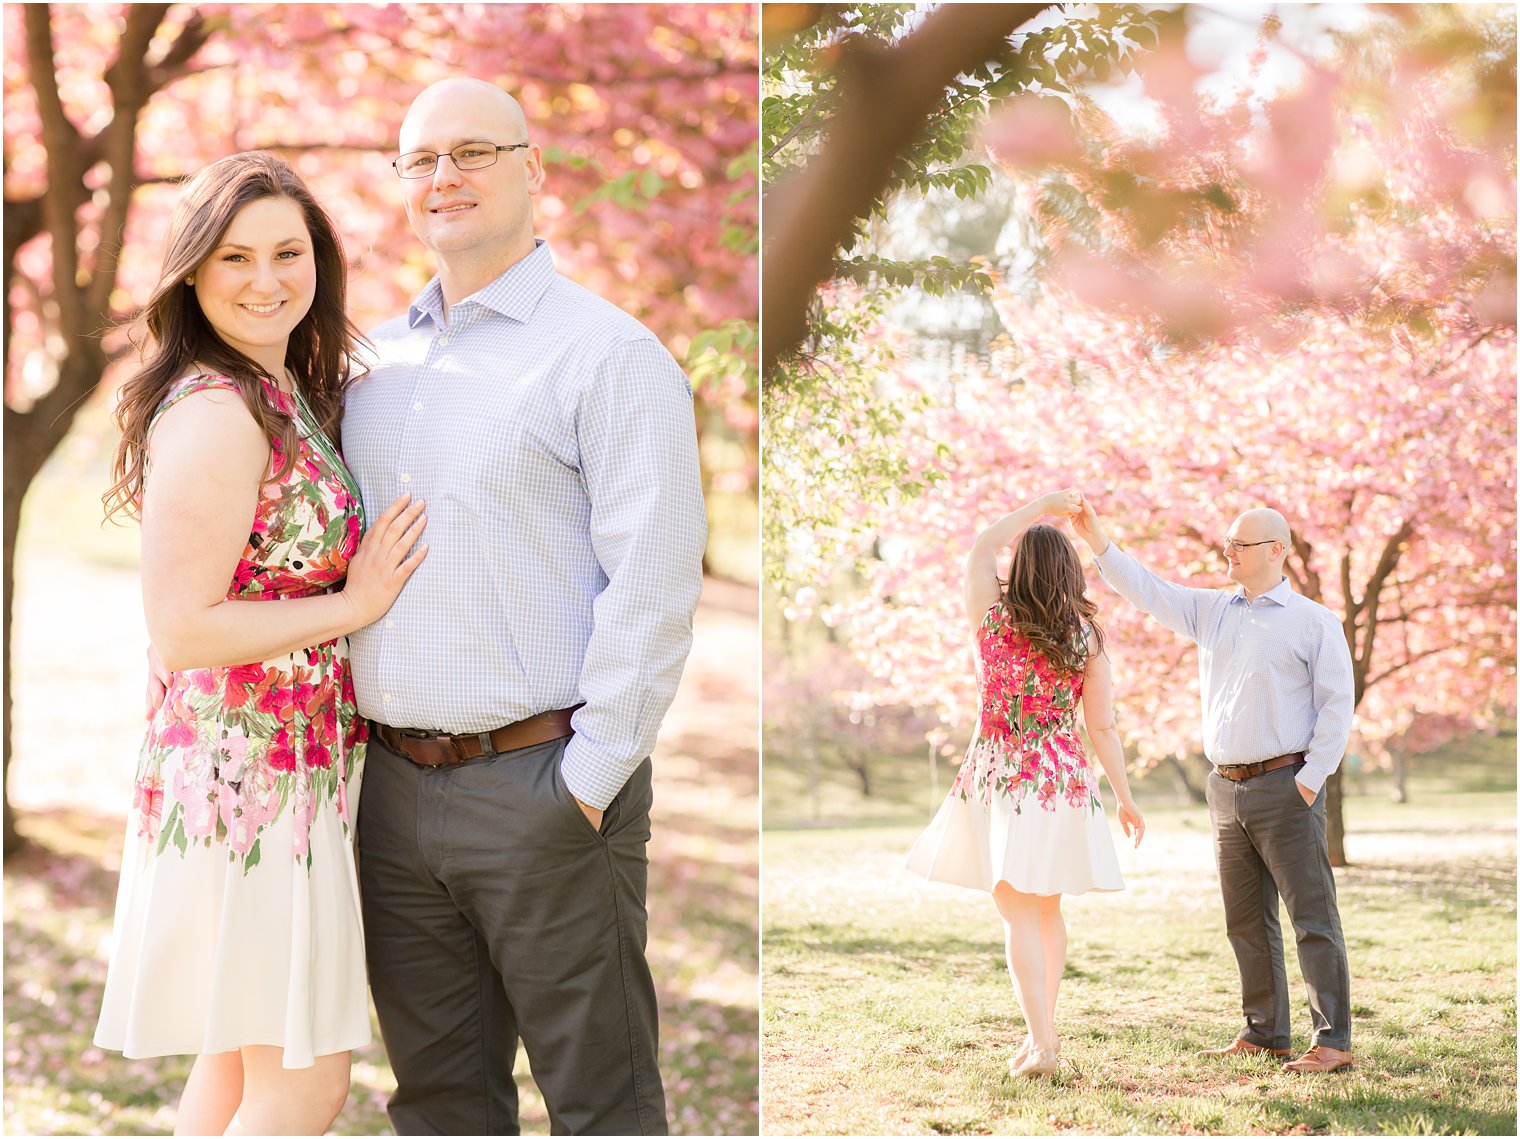 Traditional engagement photos at Branch Brook Park